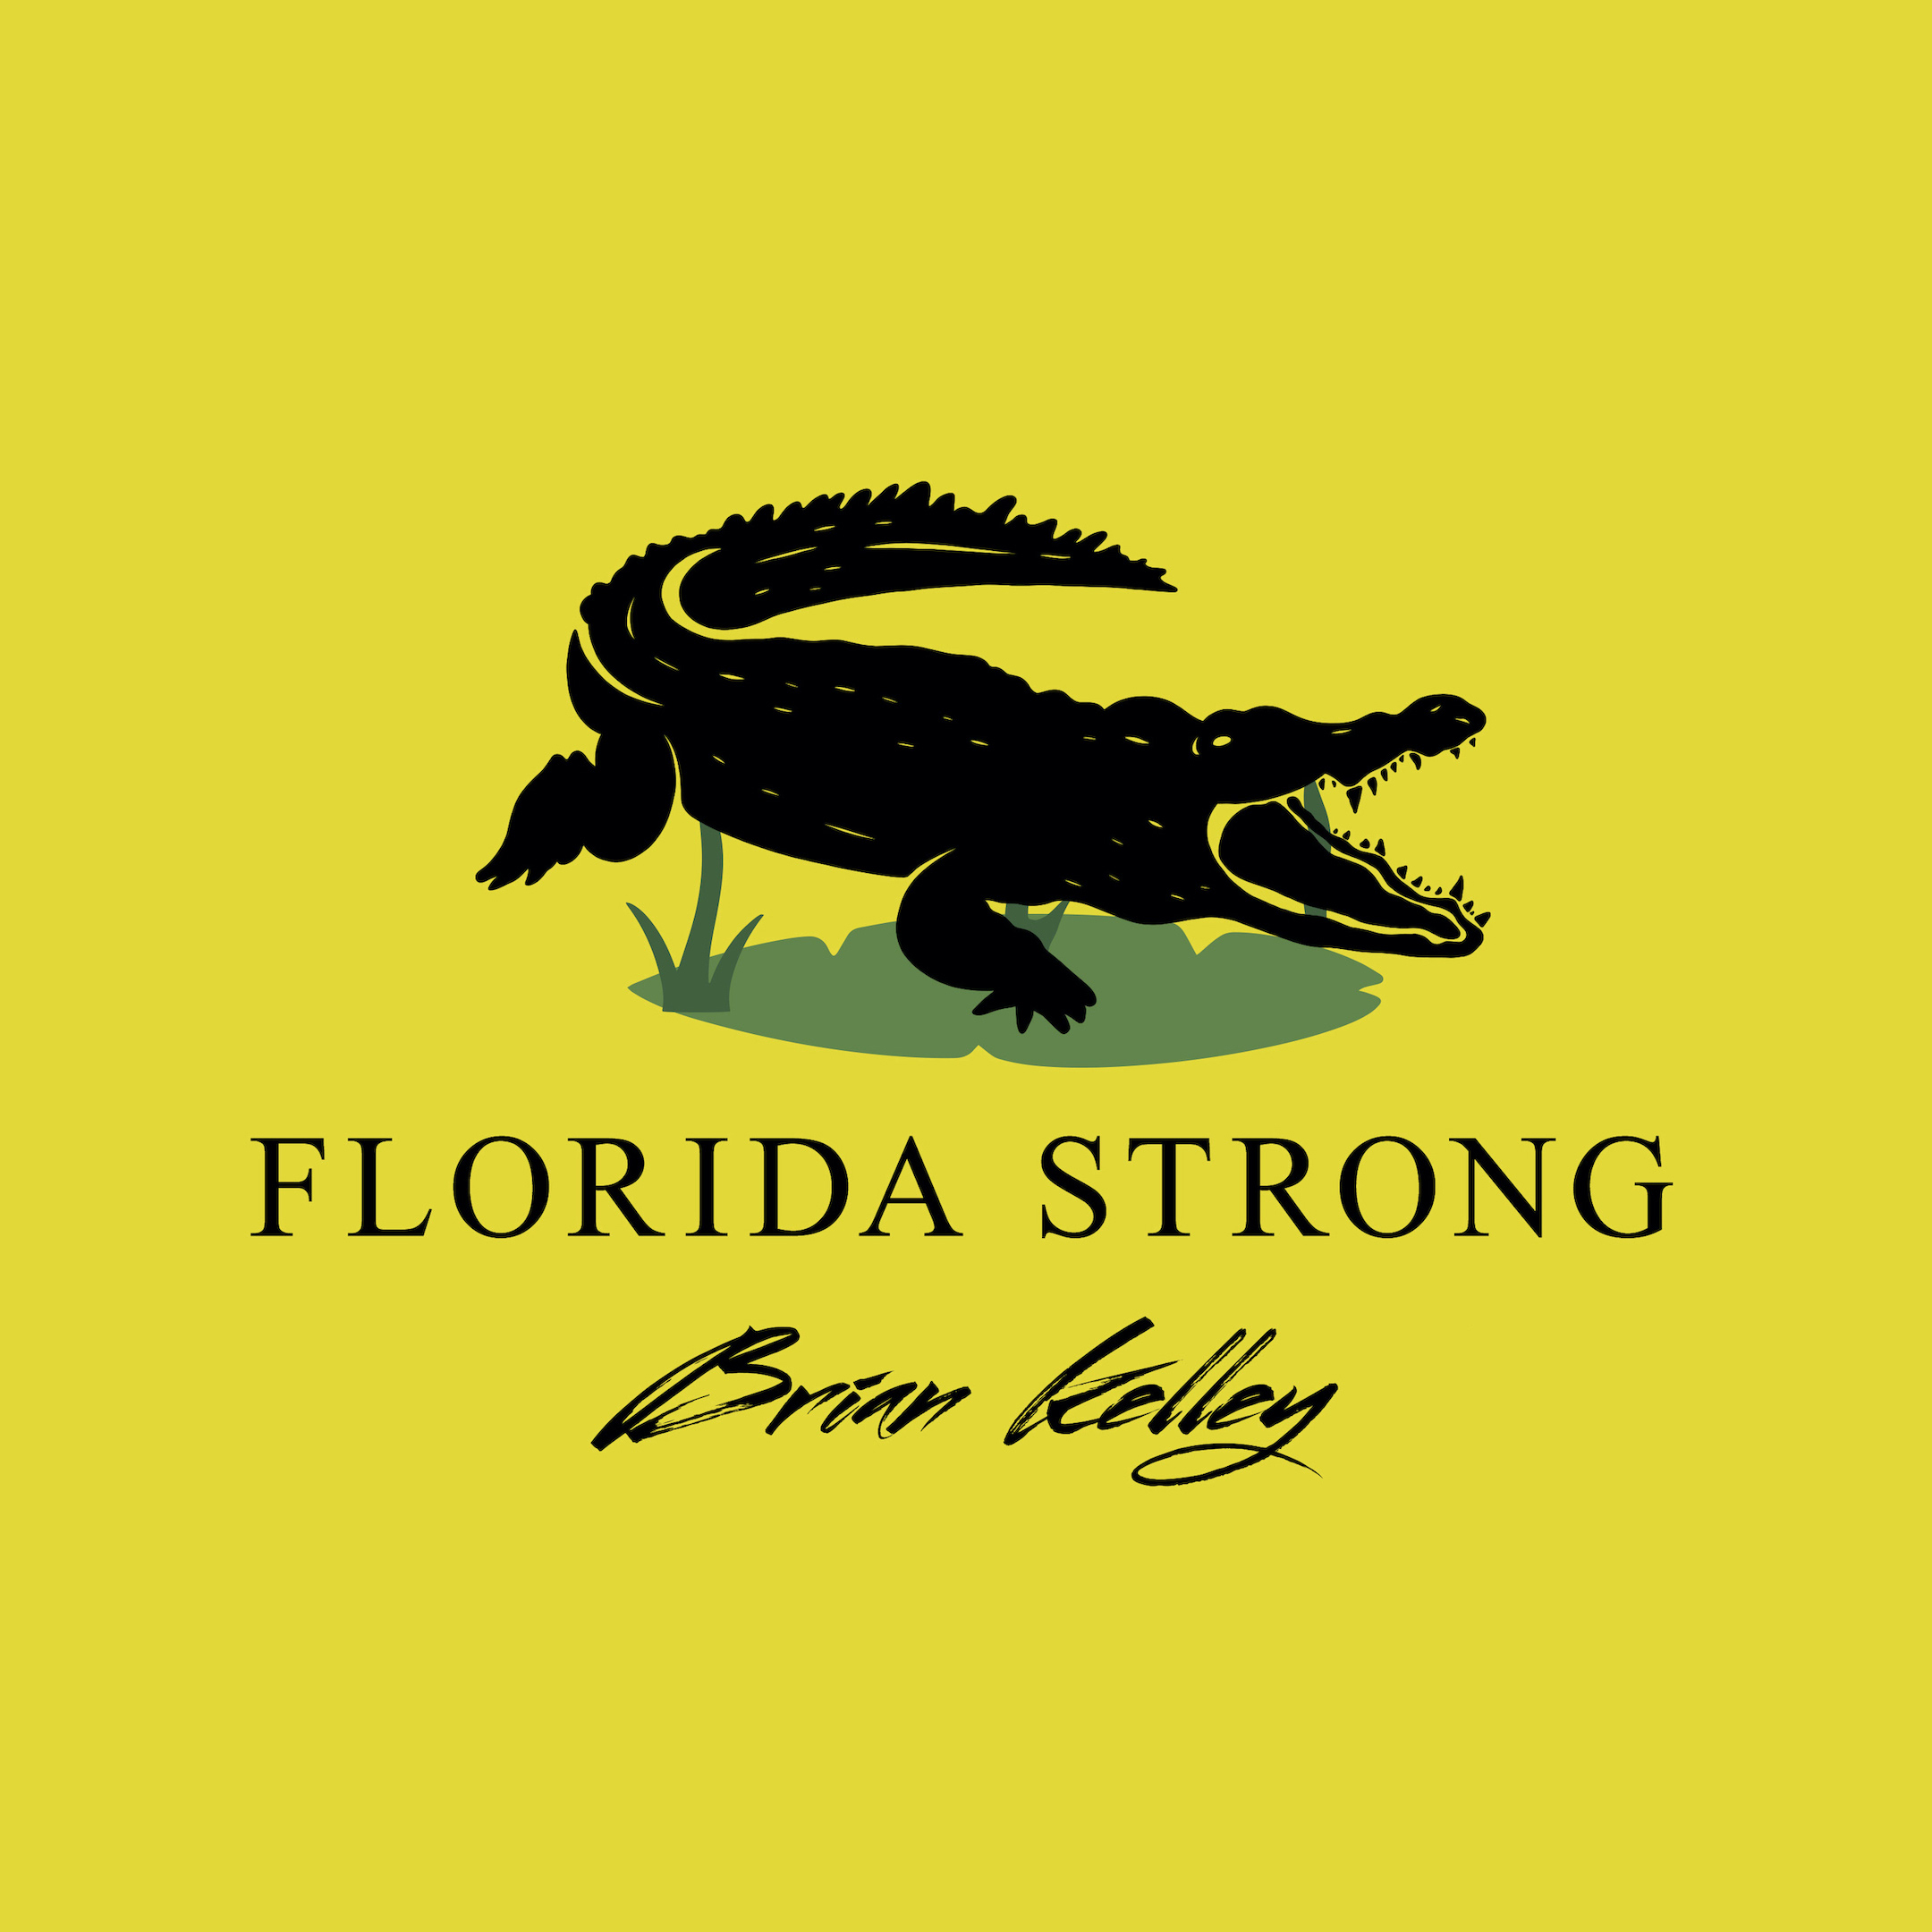 Brian Kelley, `Florida Strong` (Image courtesy of Big Machine Label Group)